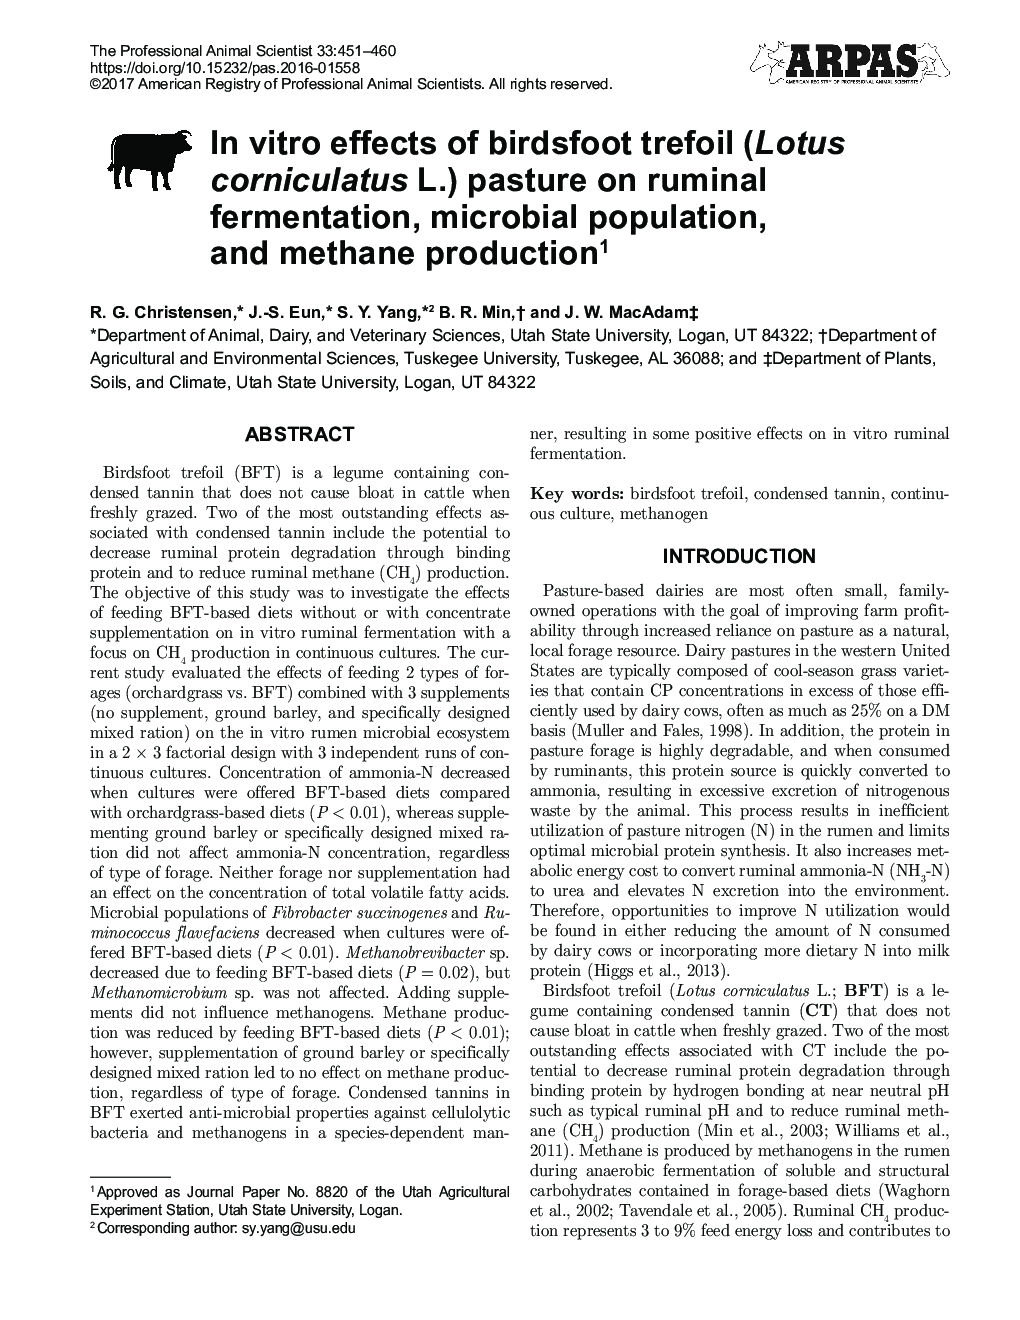 In vitro effects of birdsfoot trefoil (Lotus corniculatus L.) pasture on ruminal fermentation, microbial population, and methane production1